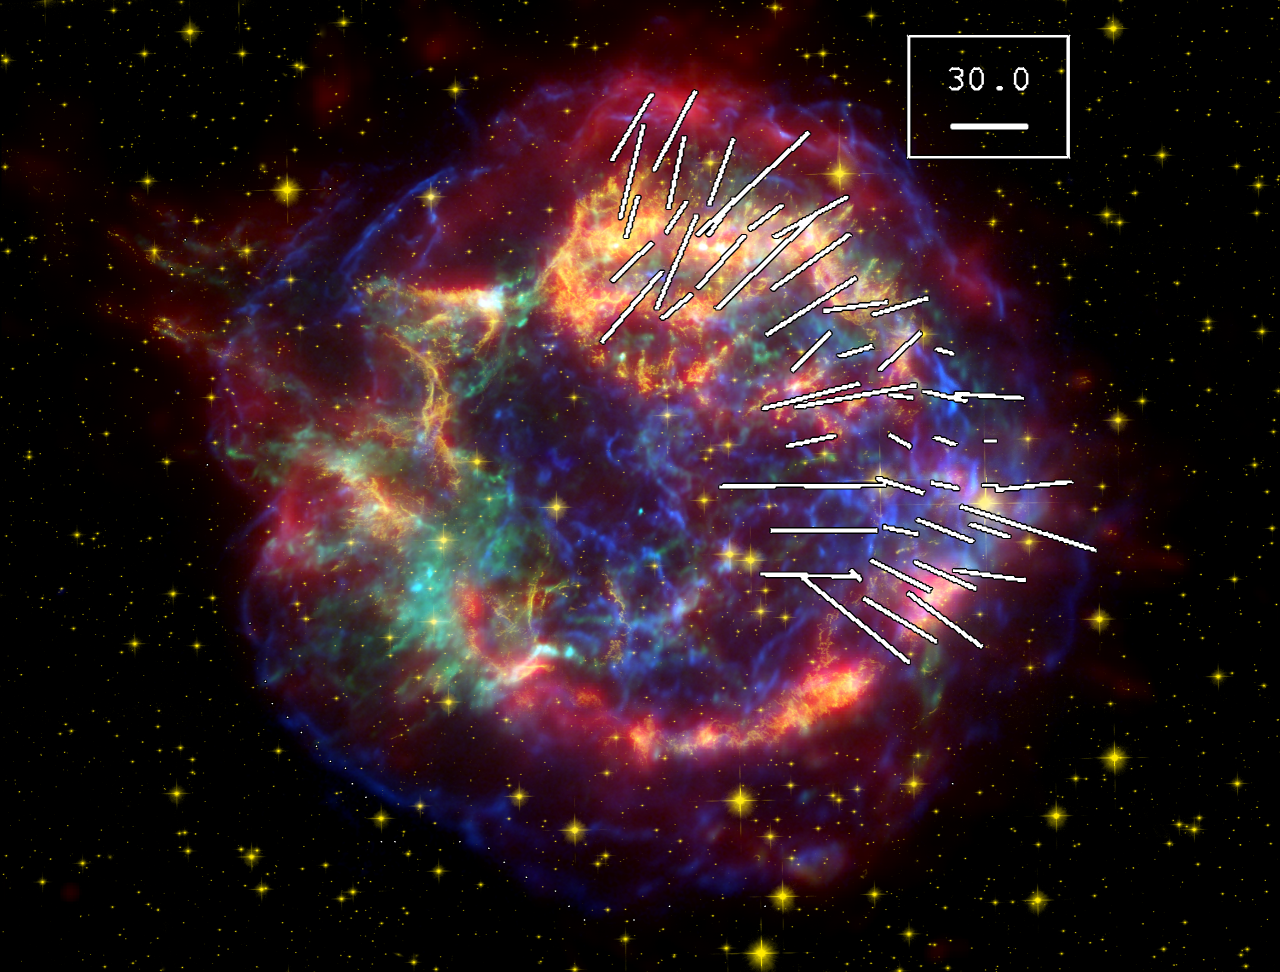 Cassiopeia A Supernova Remnant May Have A Clue To Origin Of Interstellar Dust